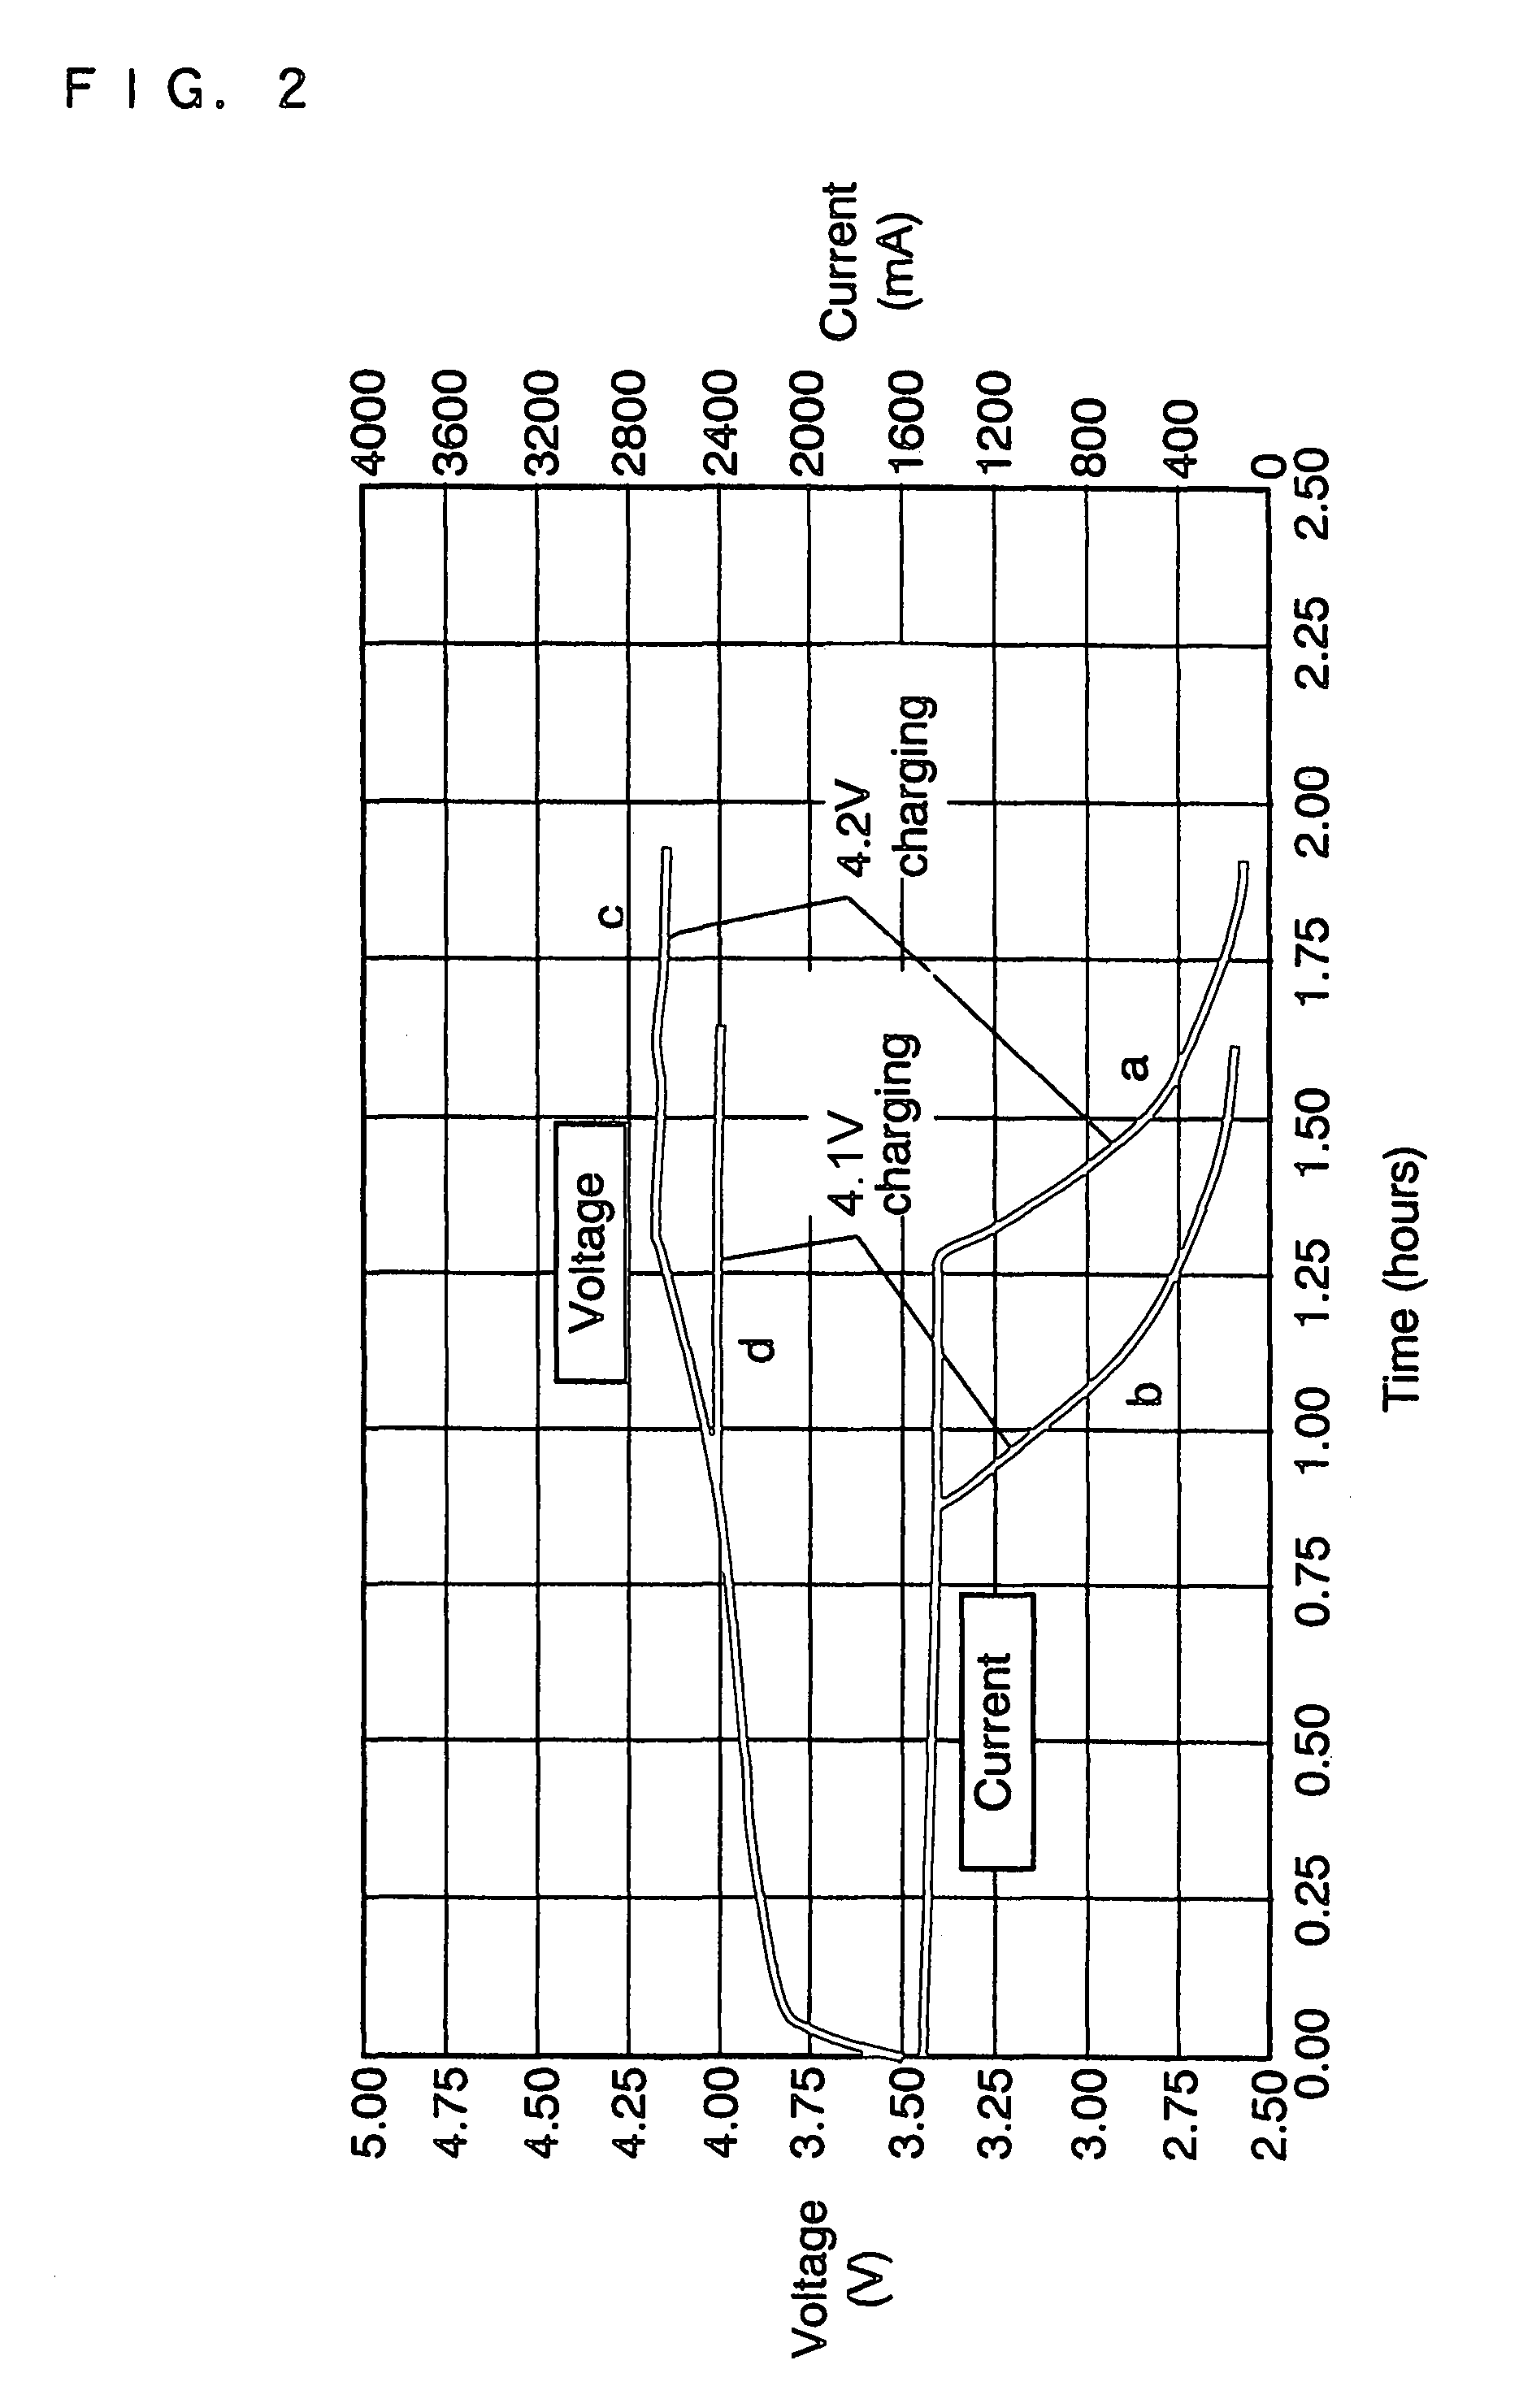 Charge control device